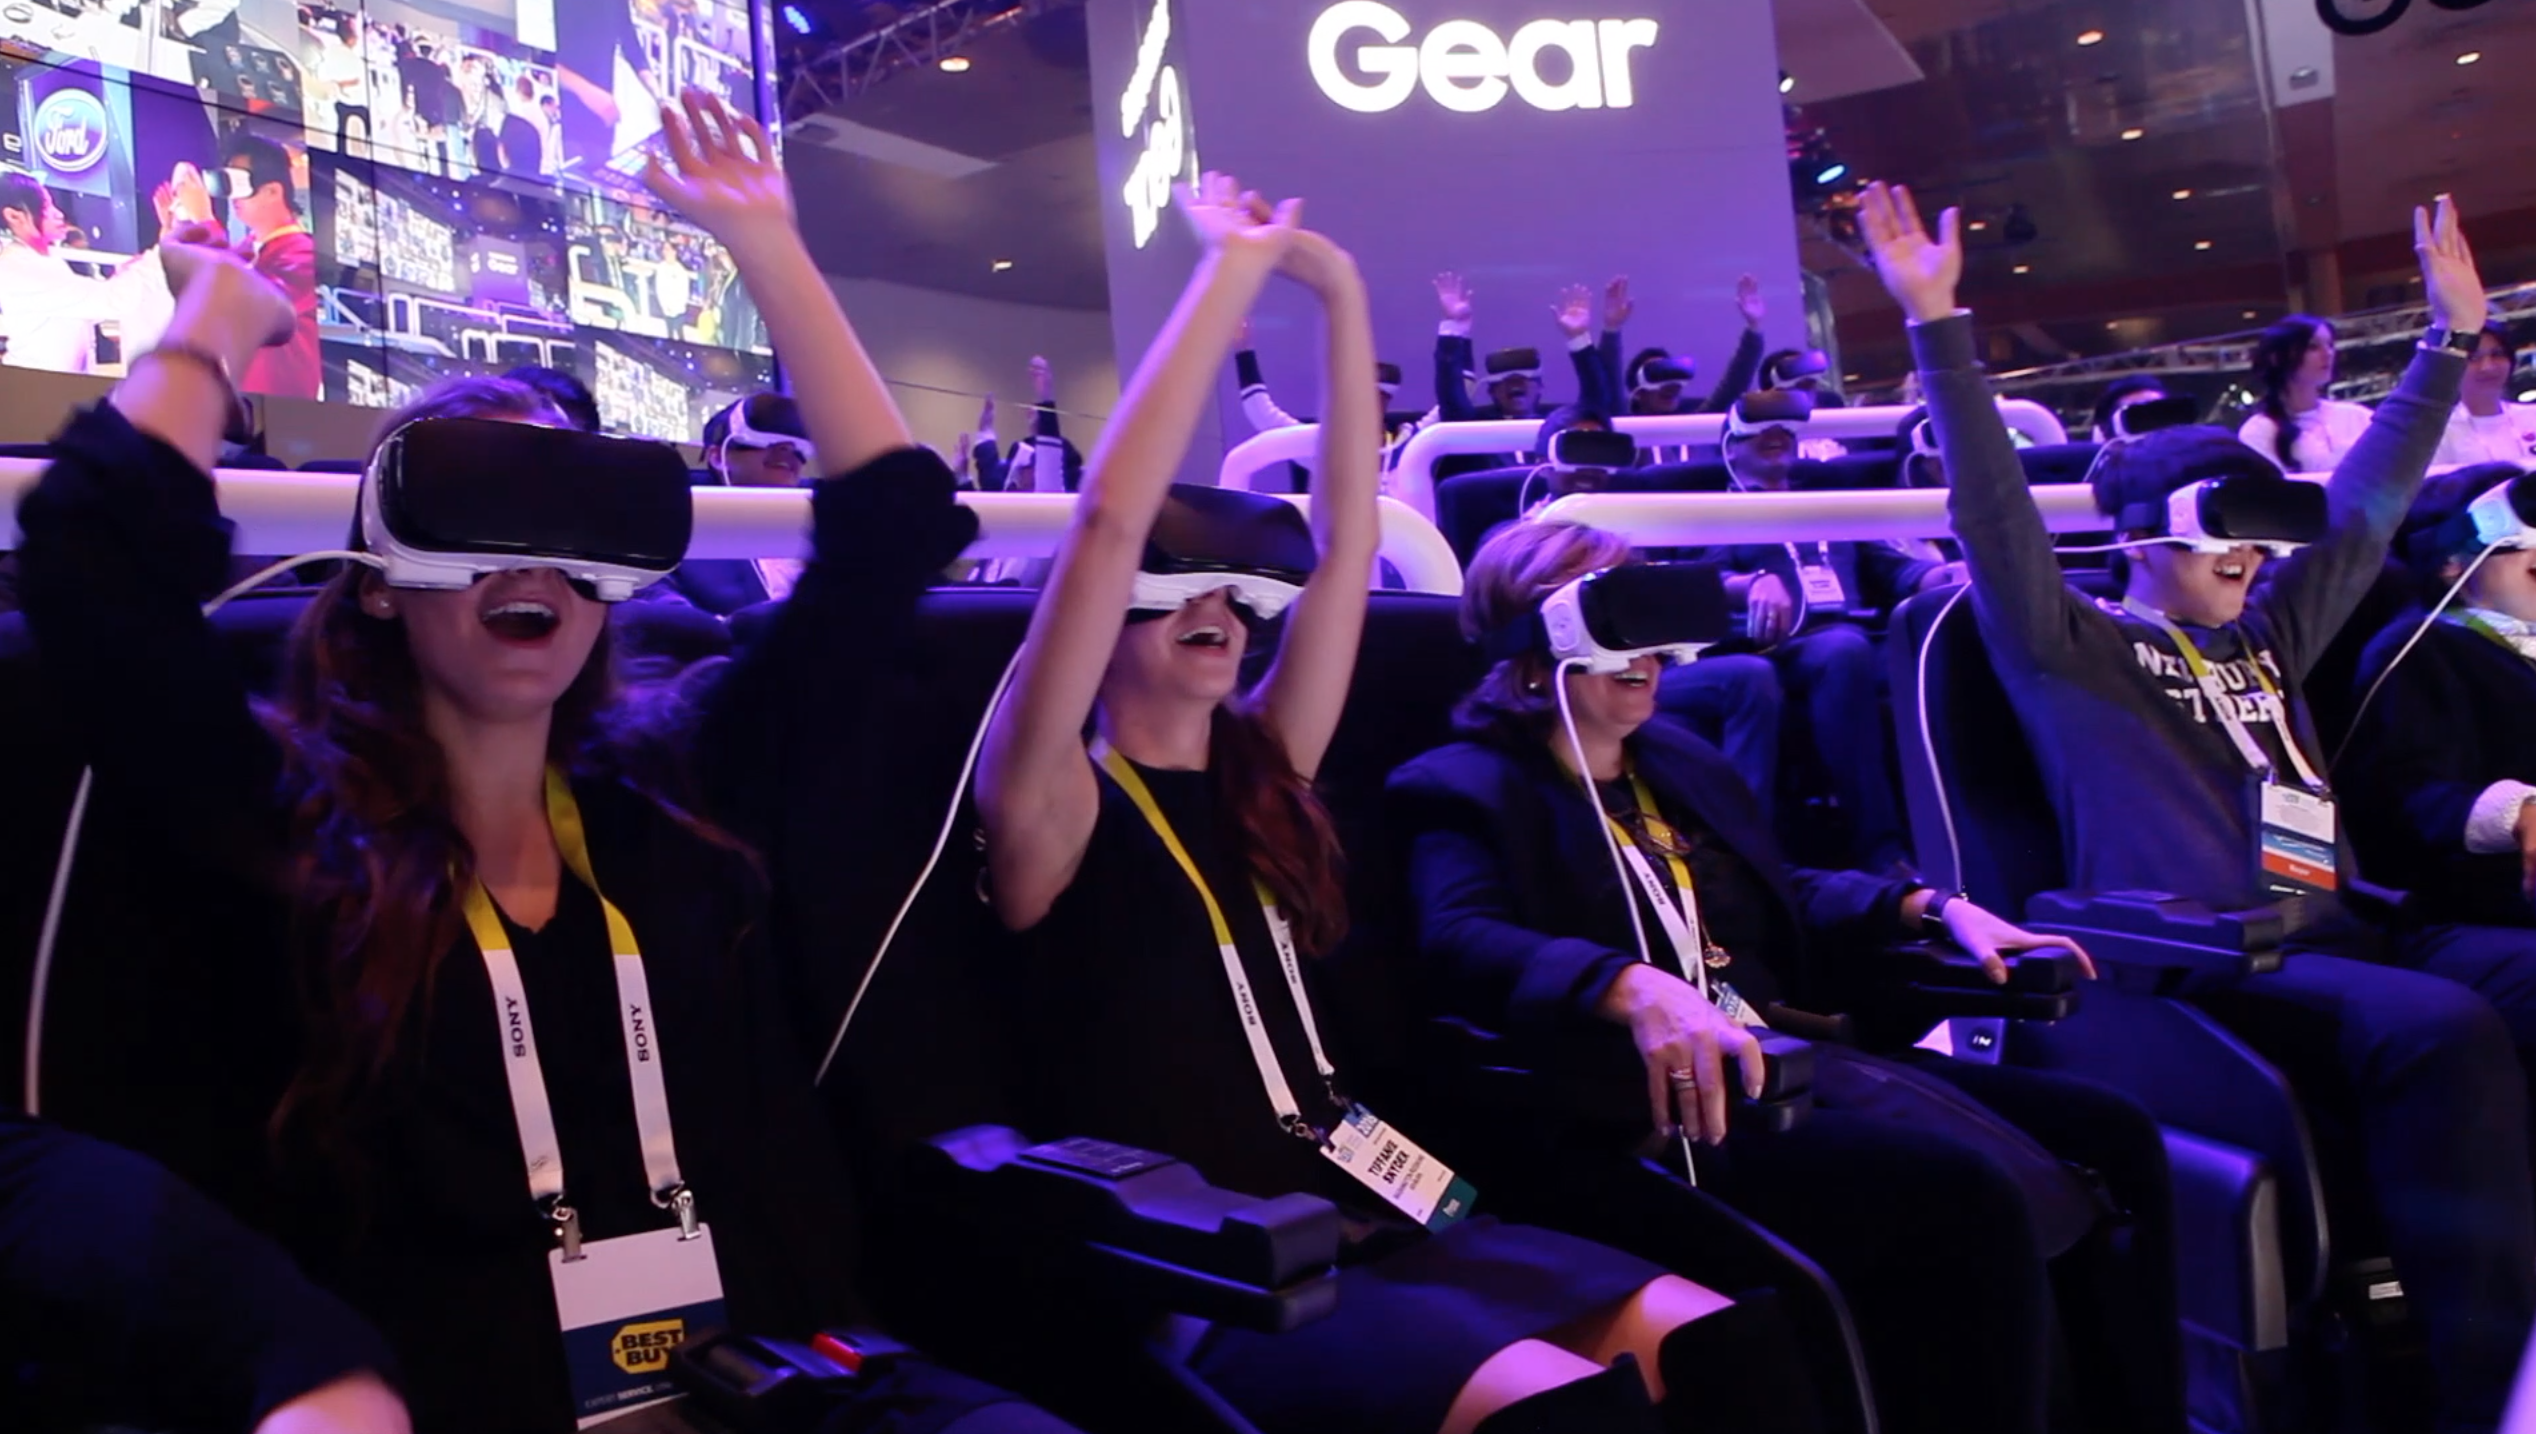 Perpetrator peach Confuse CES: The VR Roller Coaster Everyone Was Talking About - VRScout